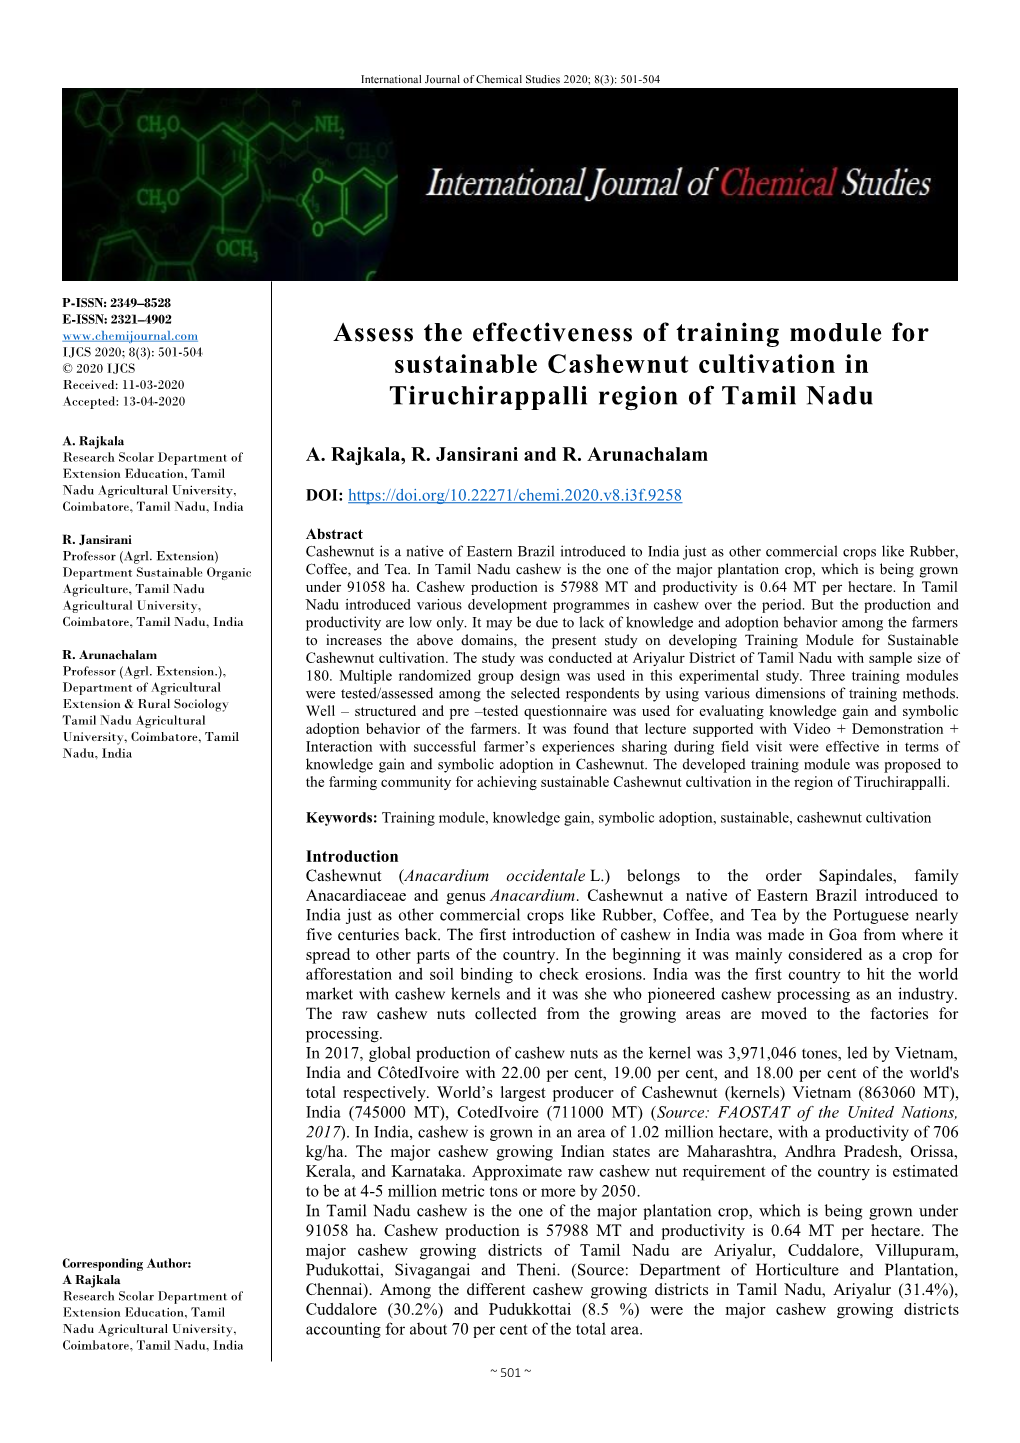 Assess the Effectiveness of Training Module for Sustainable Cashewnut Cultivation in Tiruchirappalli Region of Tamil Nadu